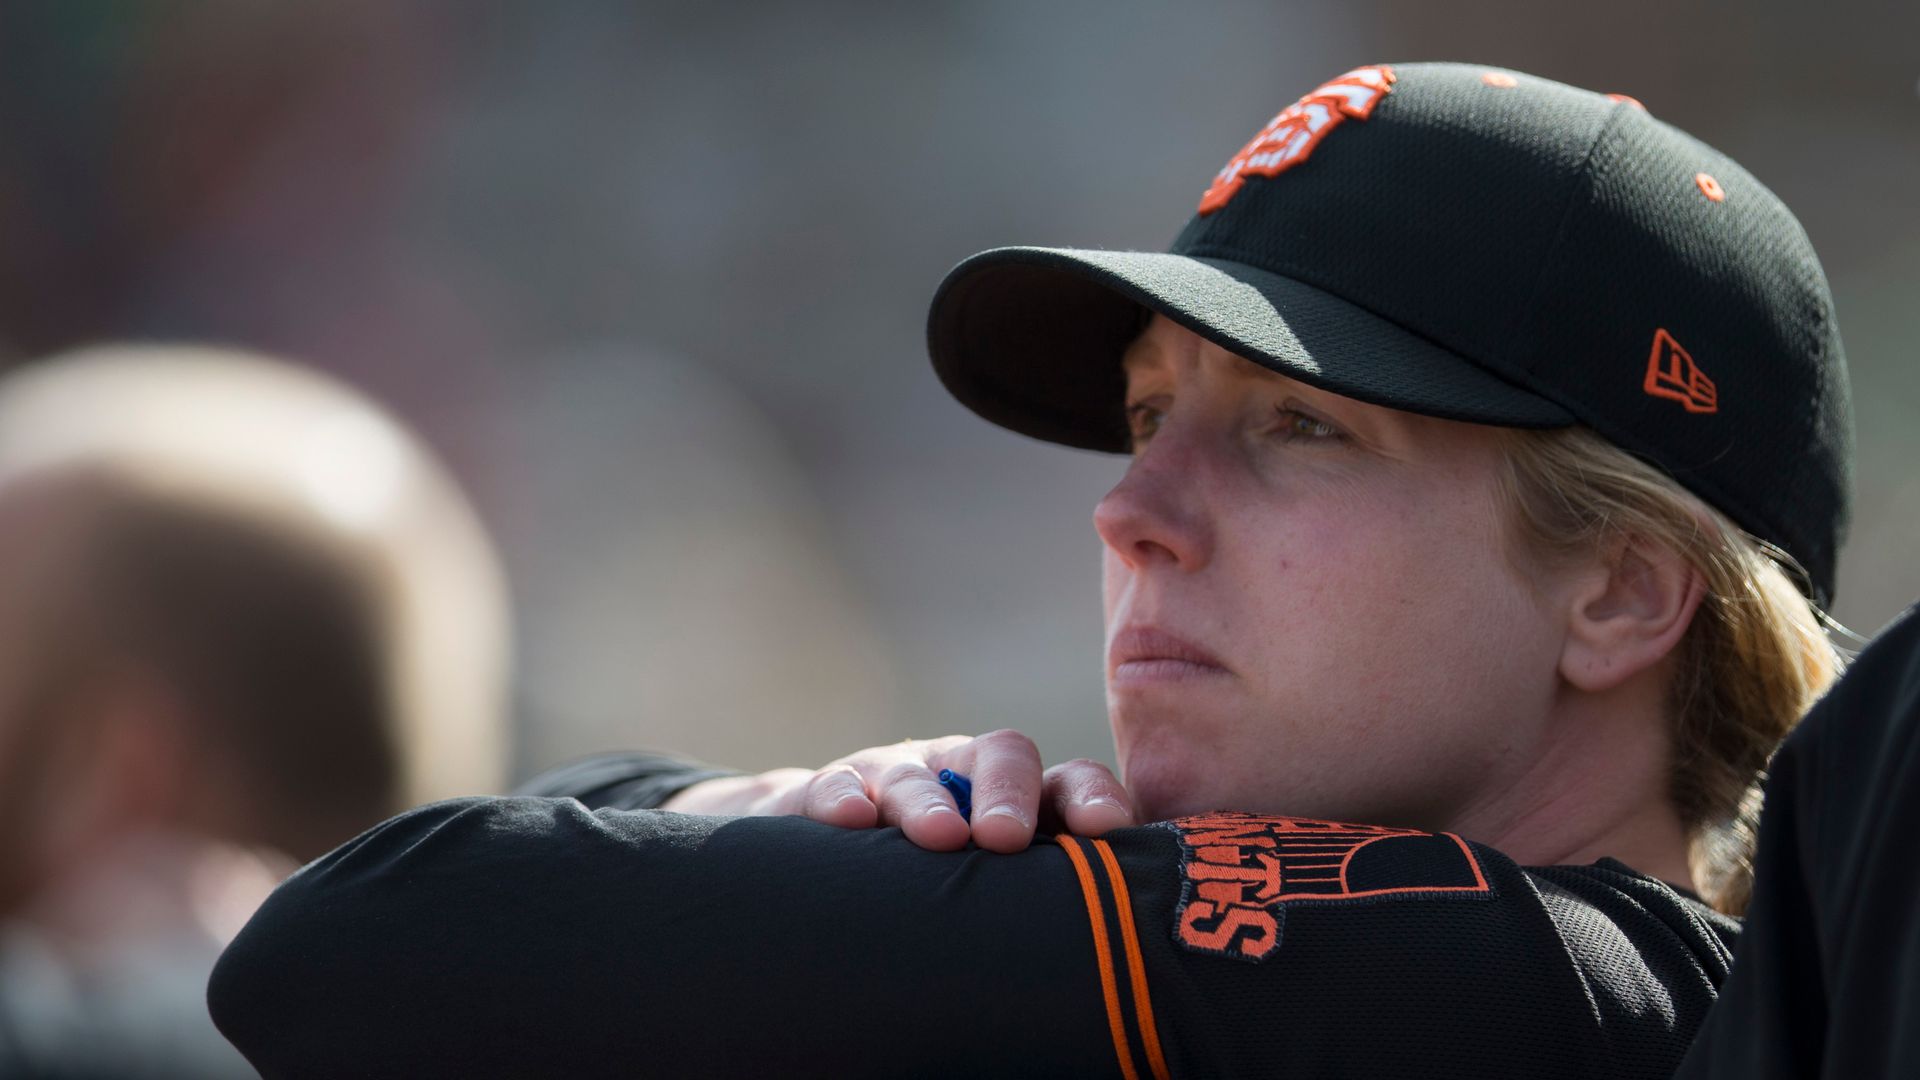  Coach Alyssa Nakken #92 of the San Francisco Giants stands in the dugout during the game against the Oakland Athletics at Hohokam Stadium on February 23, 2020 in Mesa, Arizona.